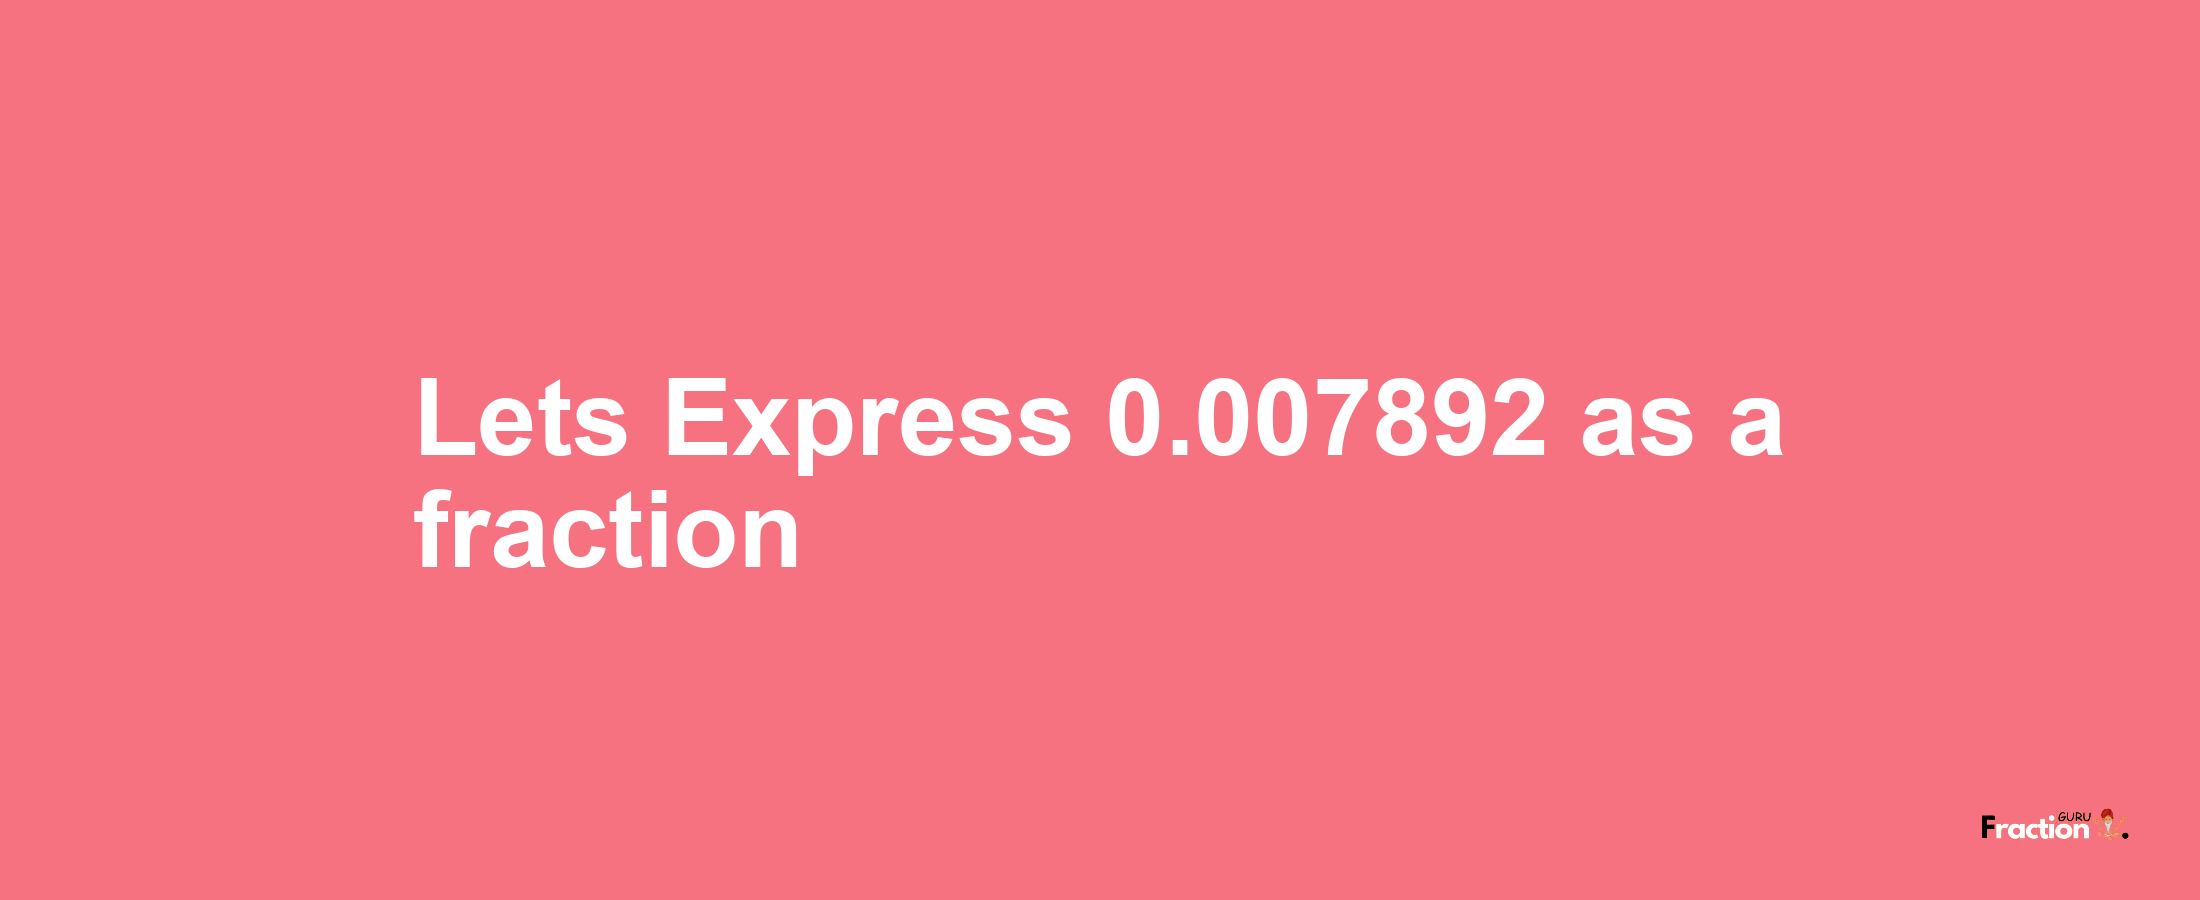 Lets Express 0.007892 as afraction